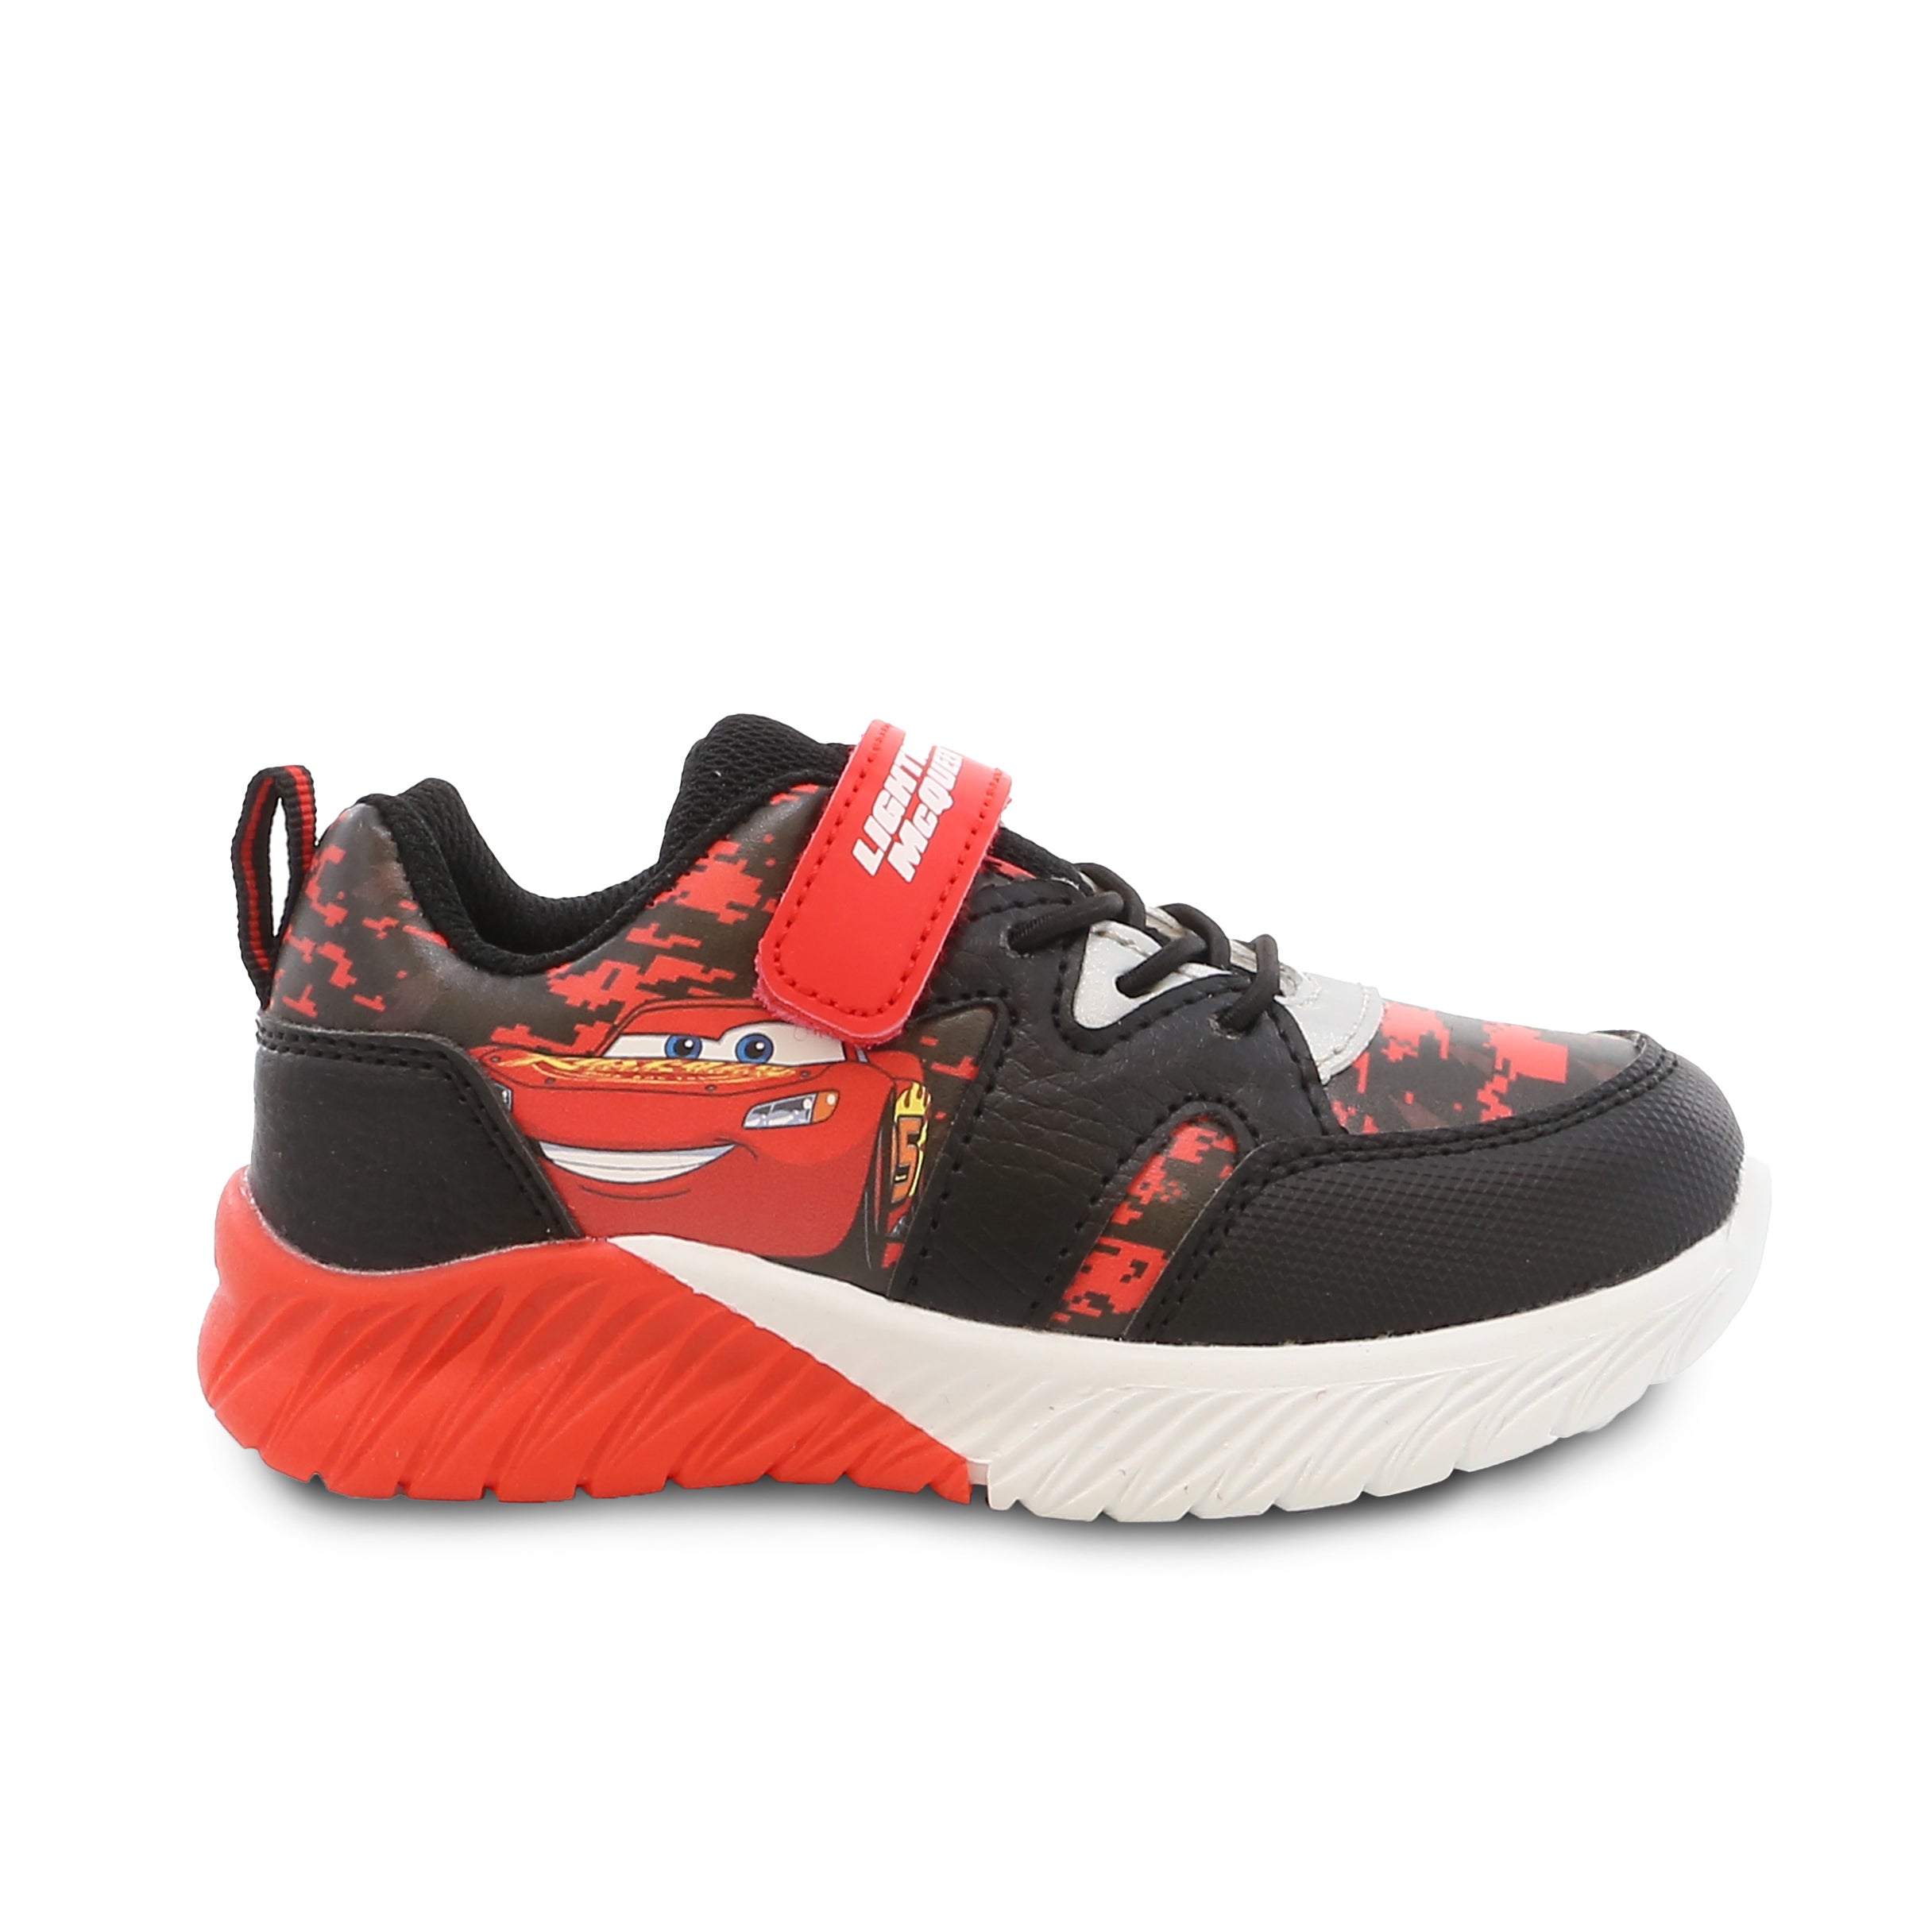 cars mcqueen toddler sneakers black red image02 cars mcqueen sneakers